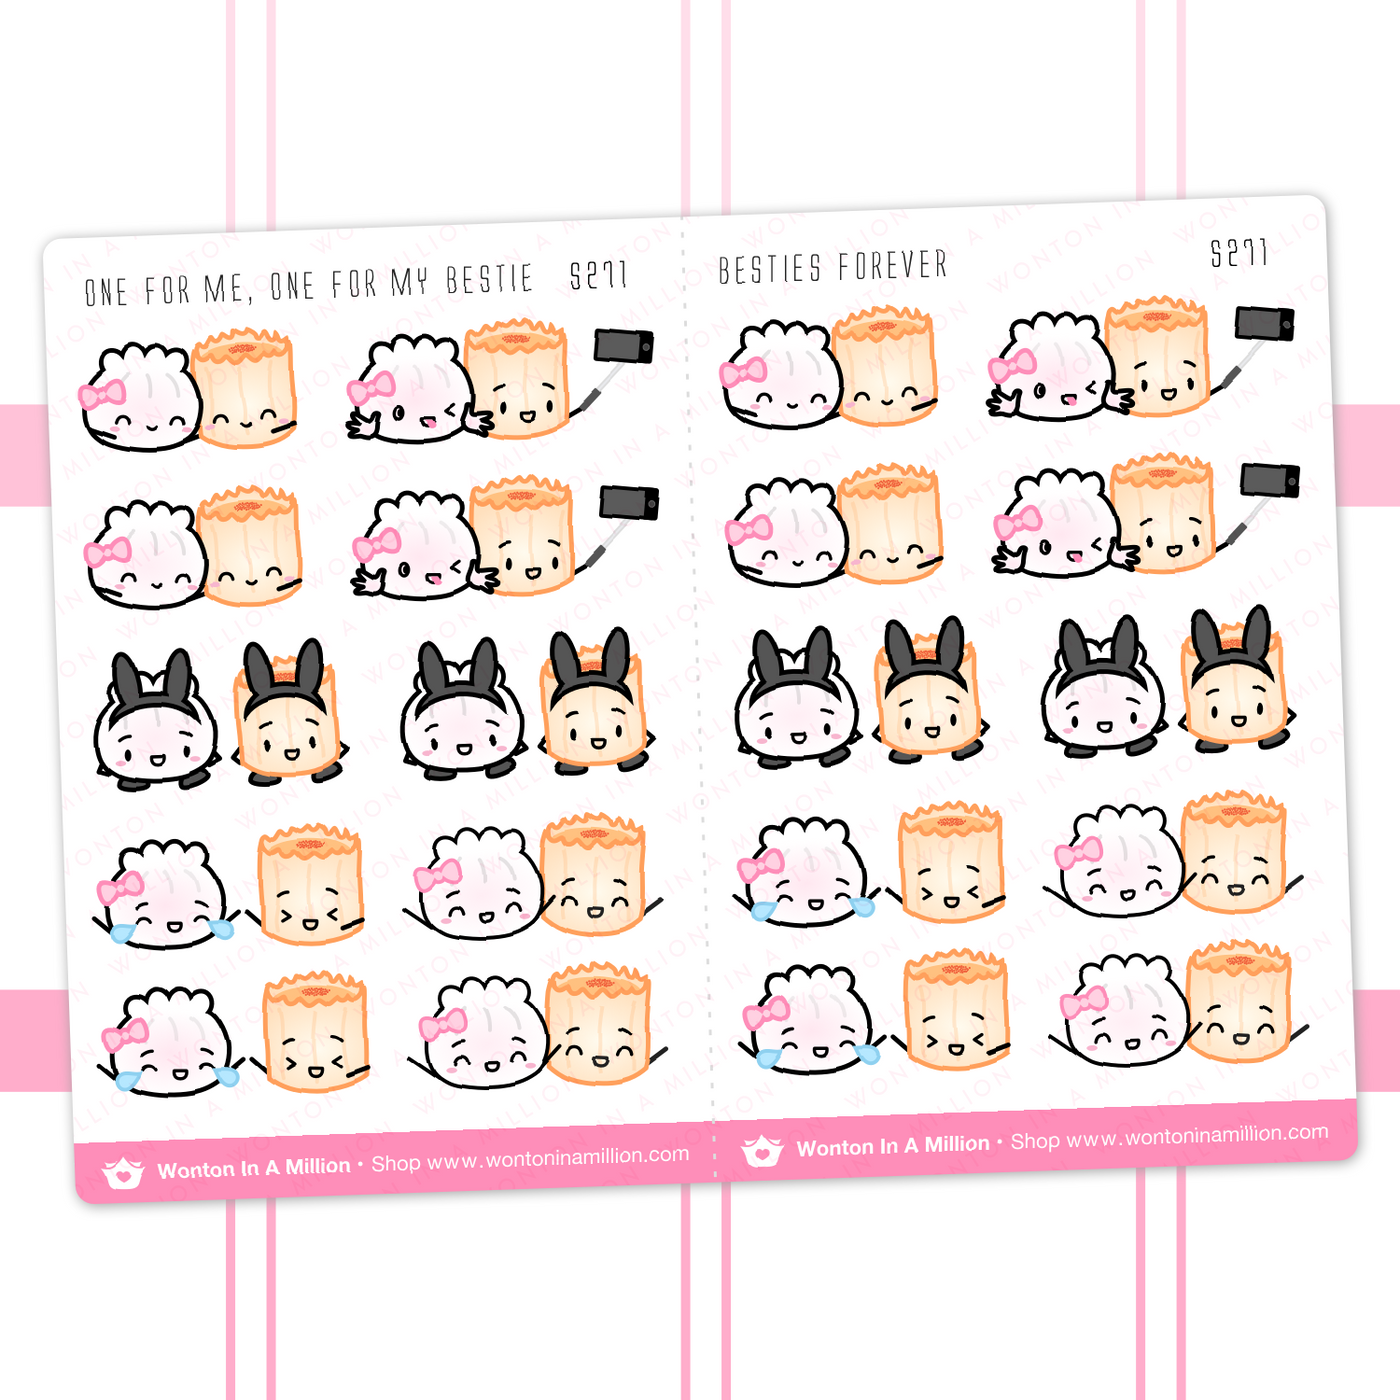 S271 | Besties Forever Stickers